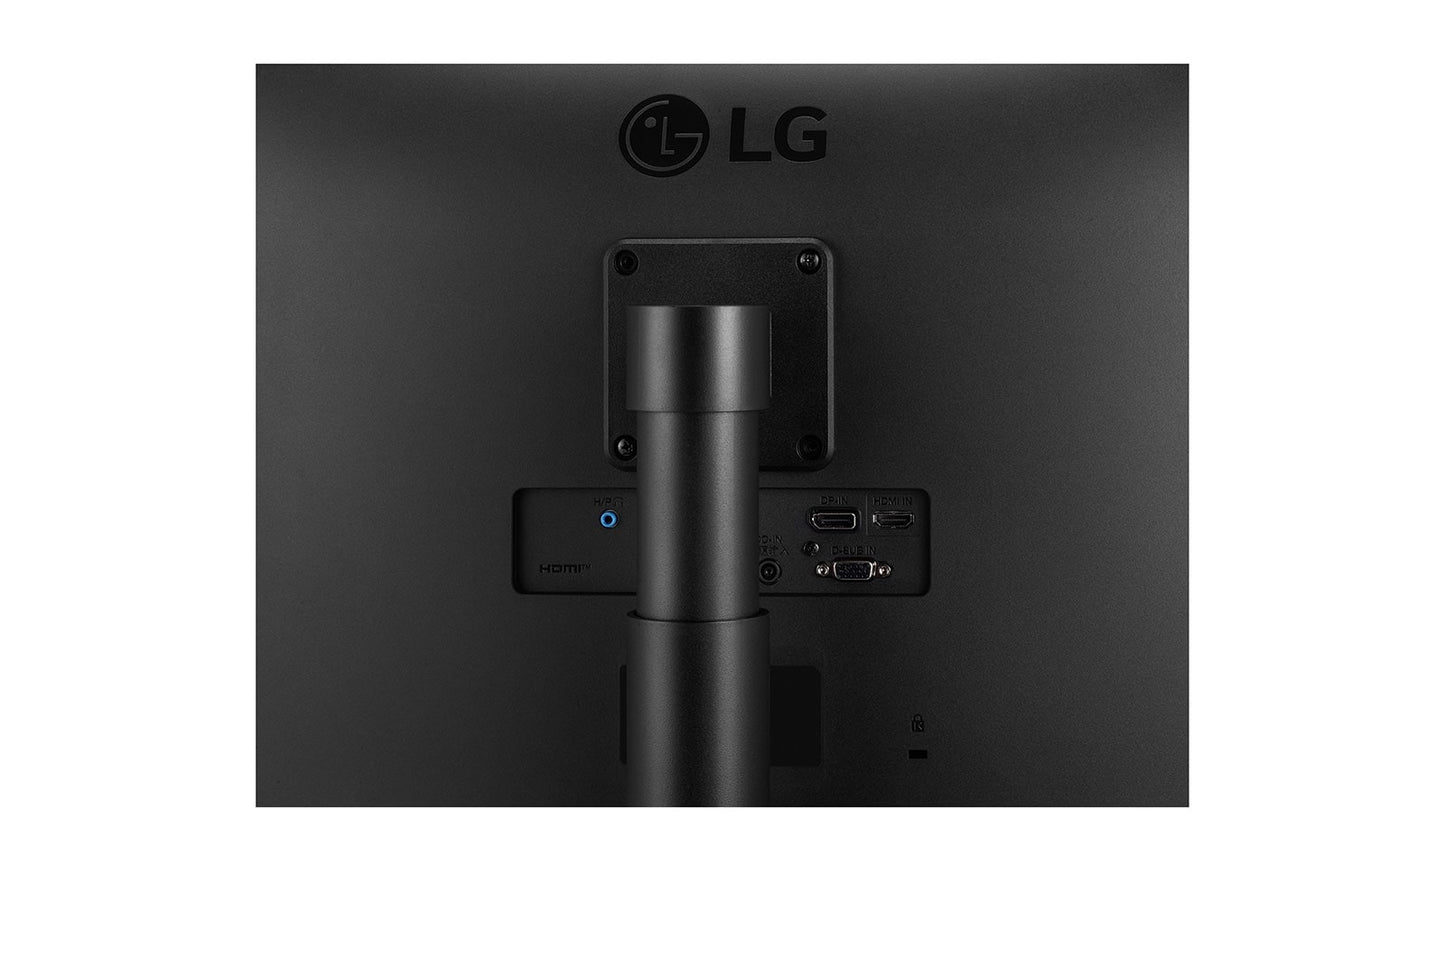 LG 27 inch (68.6 cm) IPS FHD (1920x1080 Pixels), HDR 10, Height Adjust, Display Port, HDMI, AMD FreeSync, 75 Hz Refresh, Black Color - 27MP450-Computerspace-computerspace